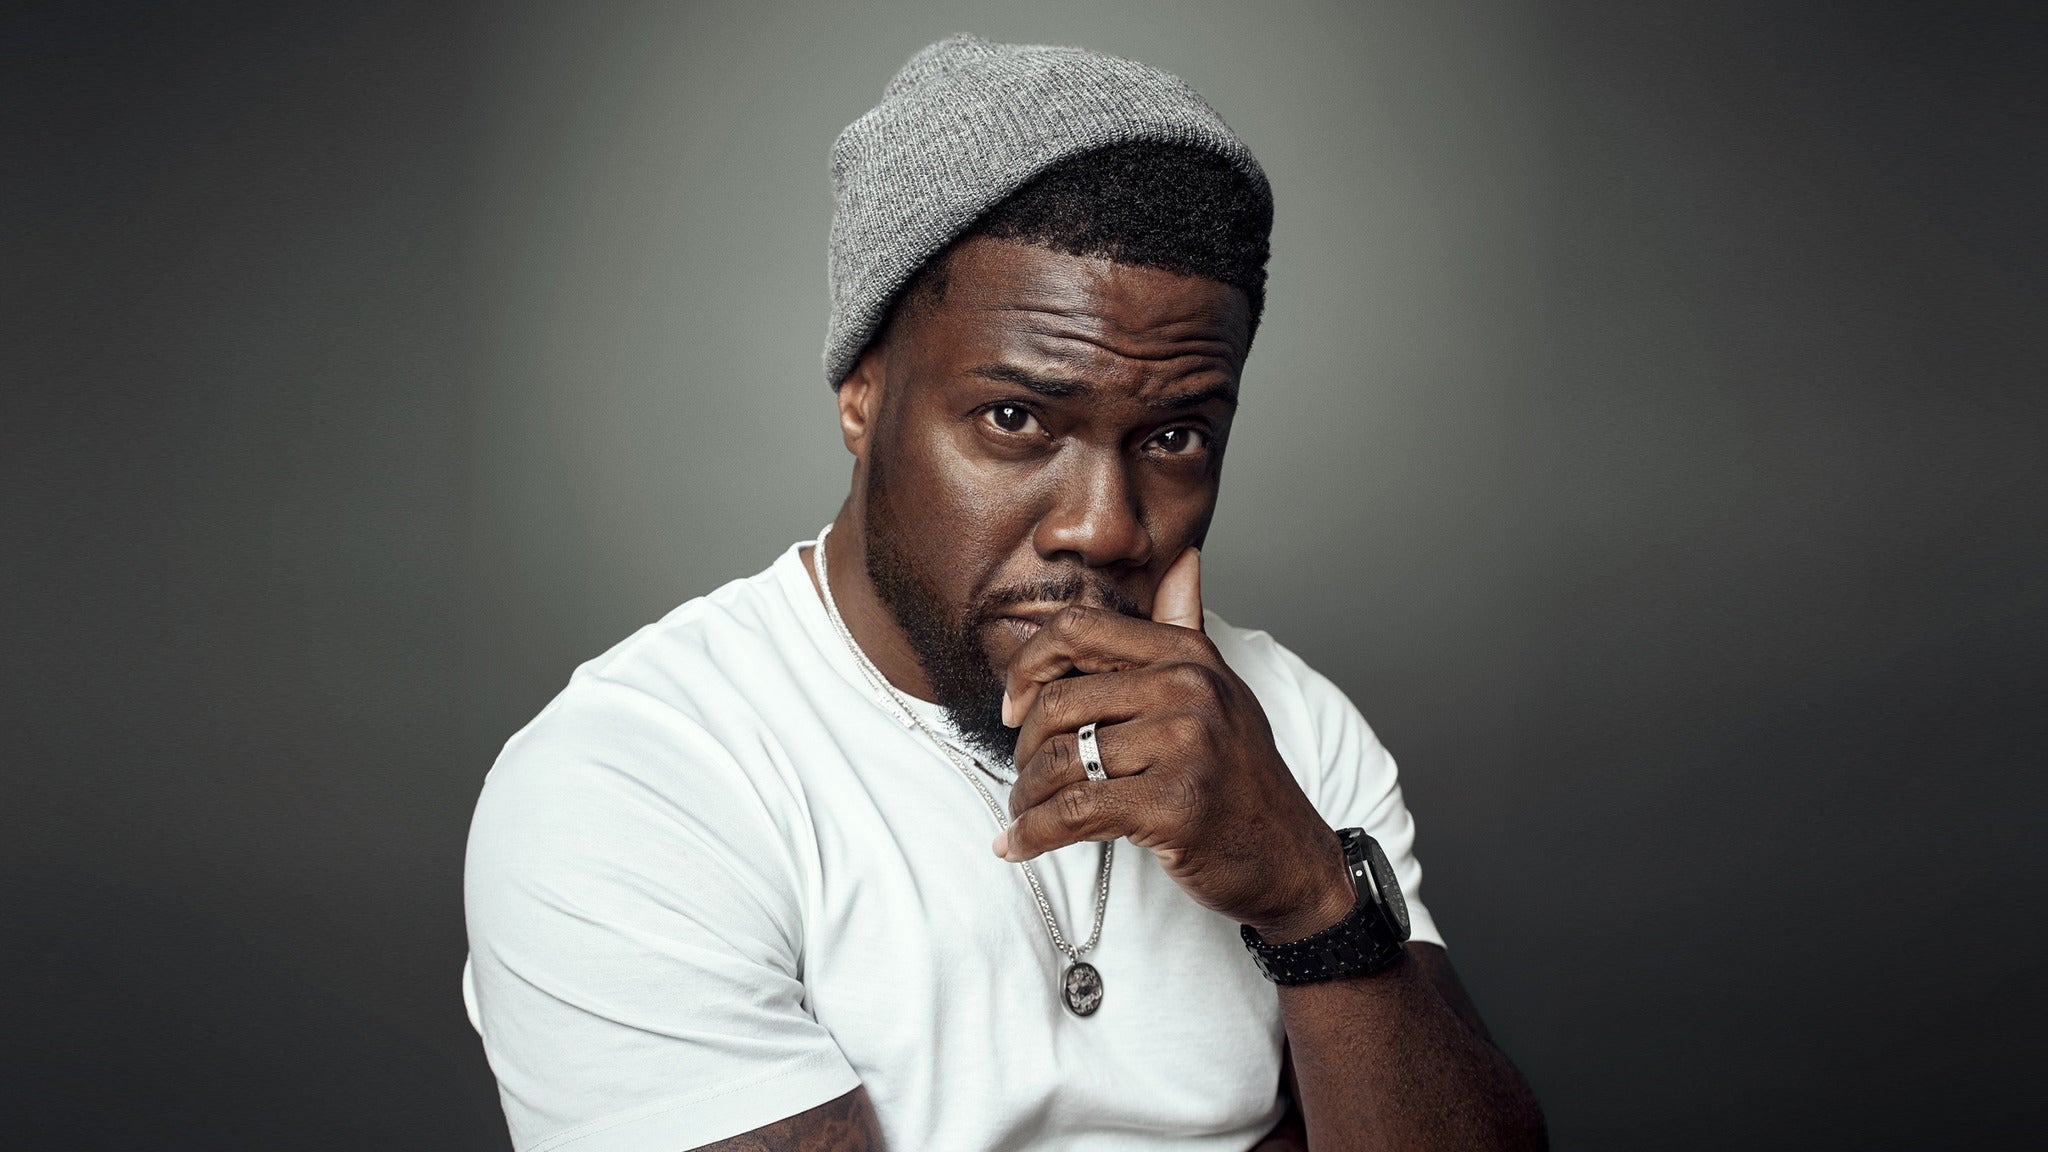 Kevin Hart: Reality Check presale code for show tickets in Calgary, AB (Scotiabank Saddledome)